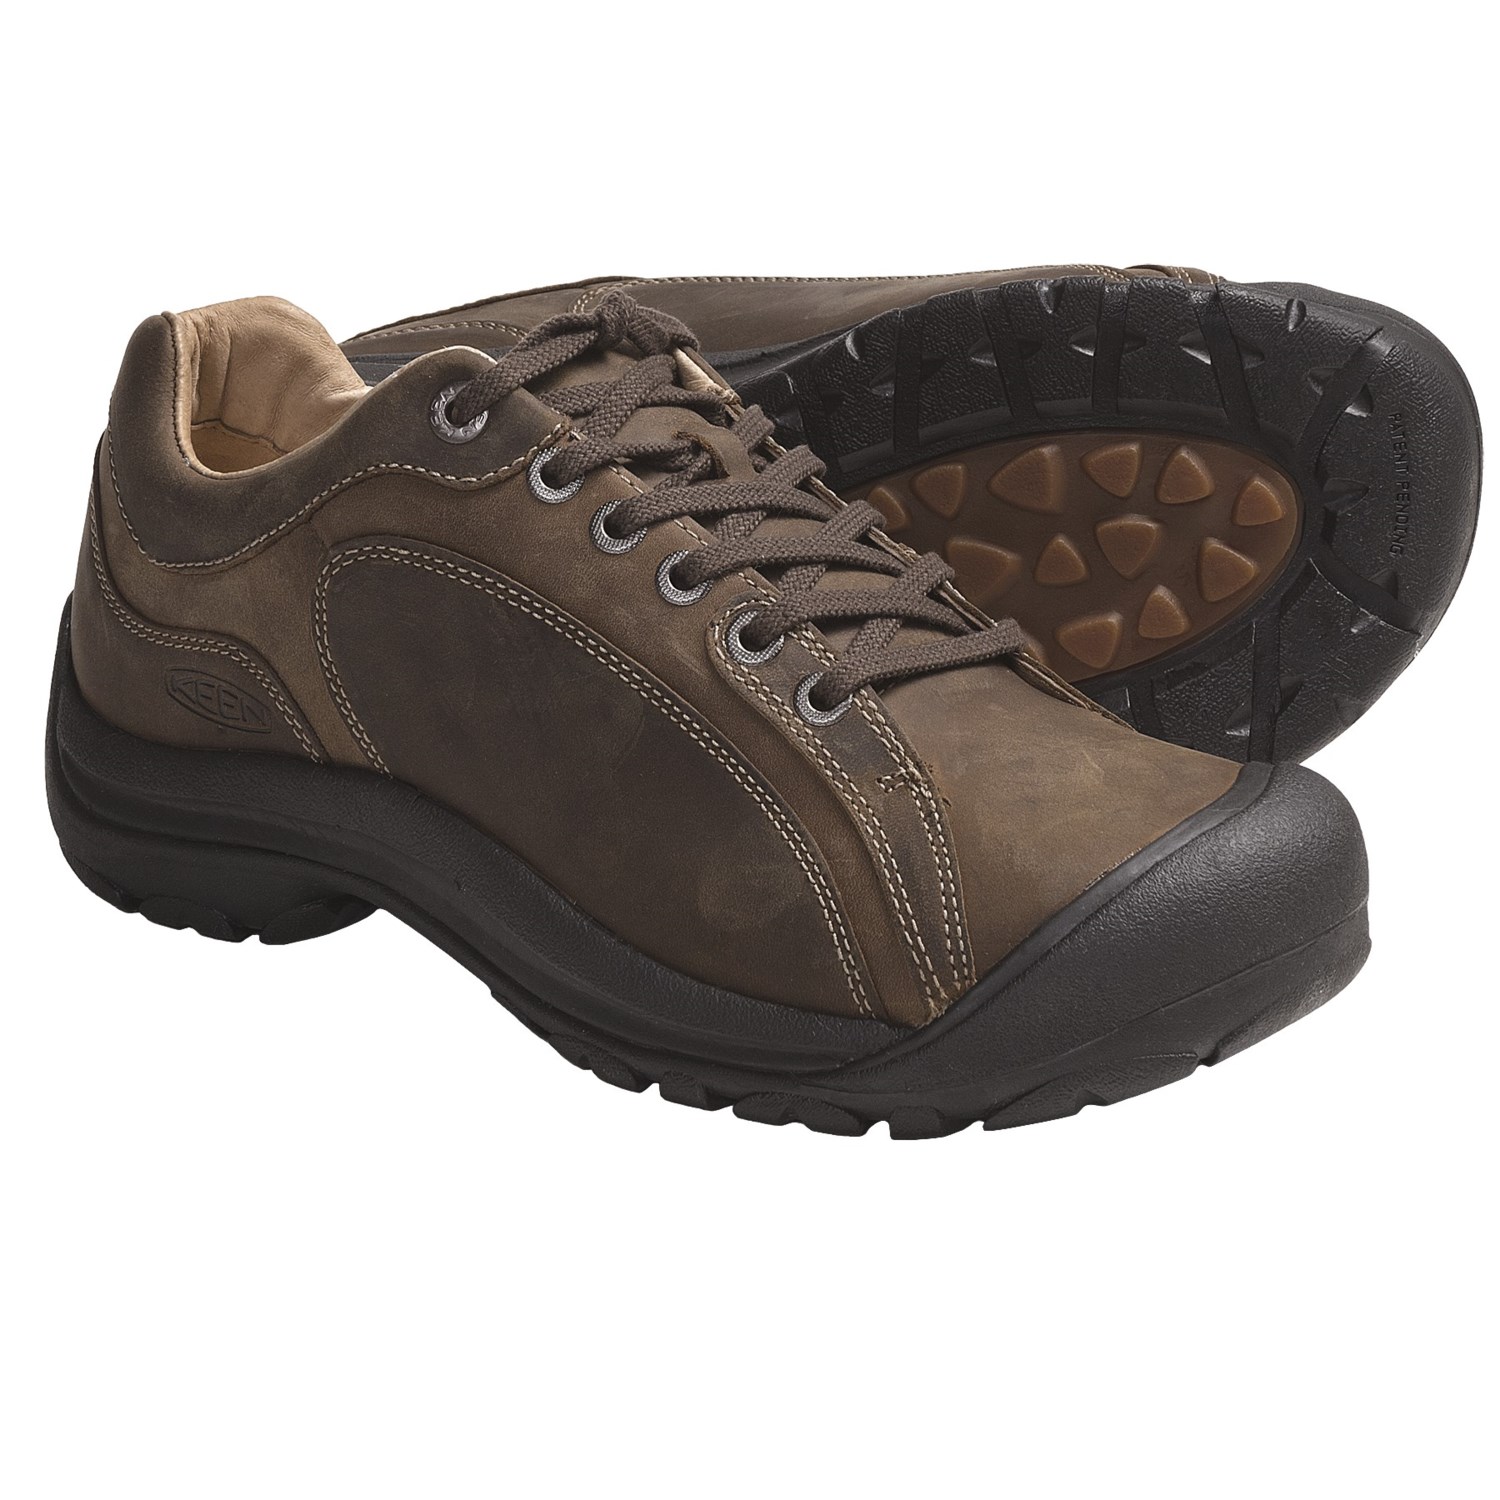 Keen Briggs II Lace-Up Shoes (For Men) 5119G - Save 40%